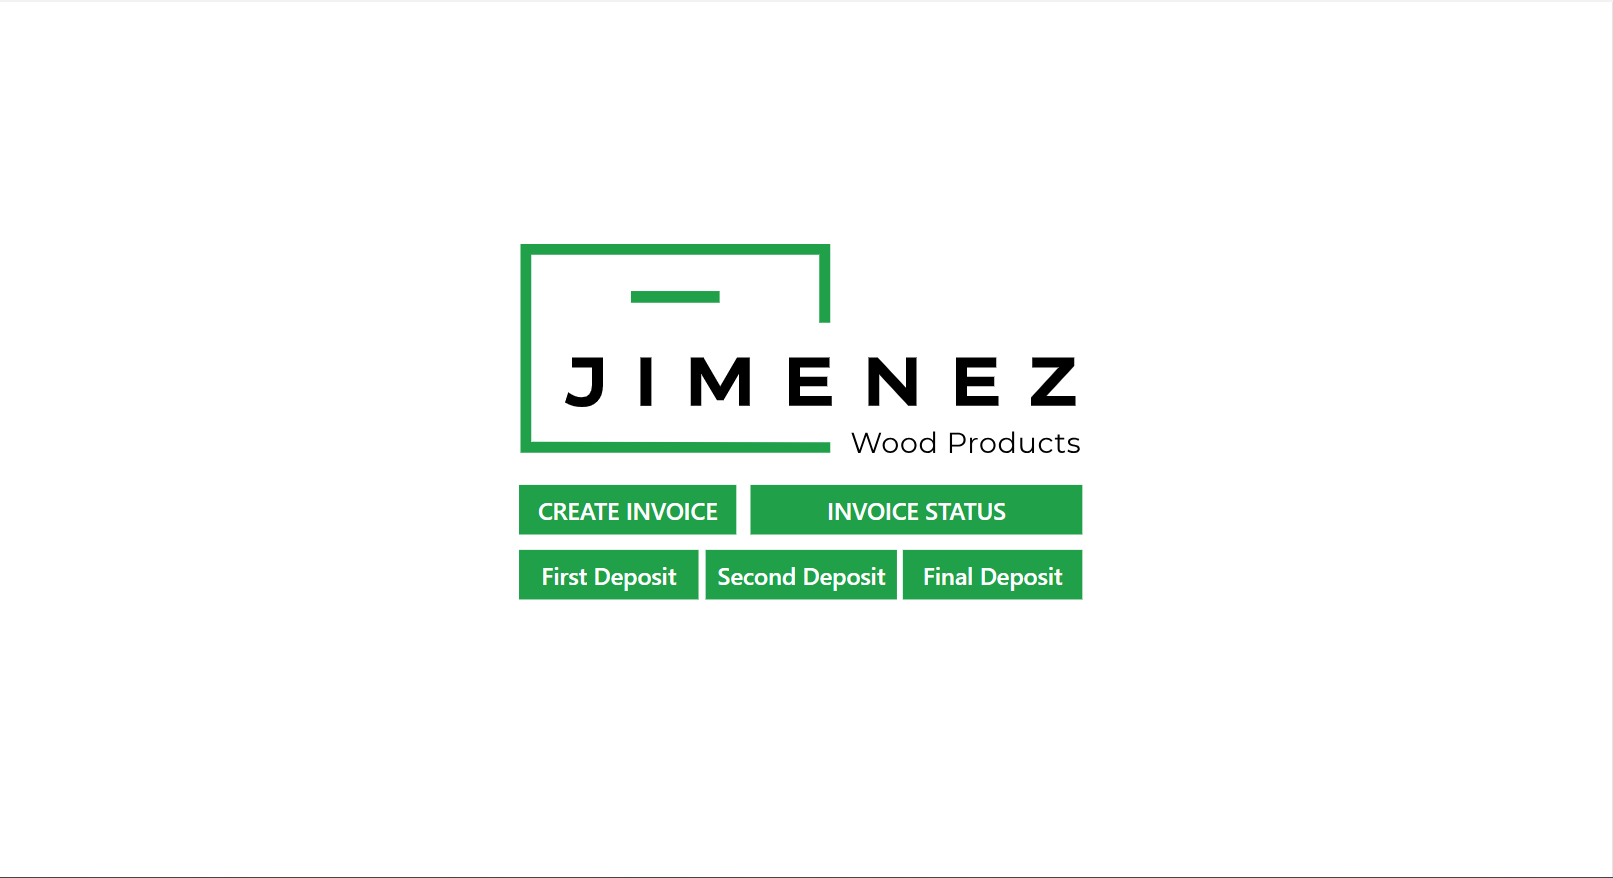 Jimenez Wood Products Invoicing System